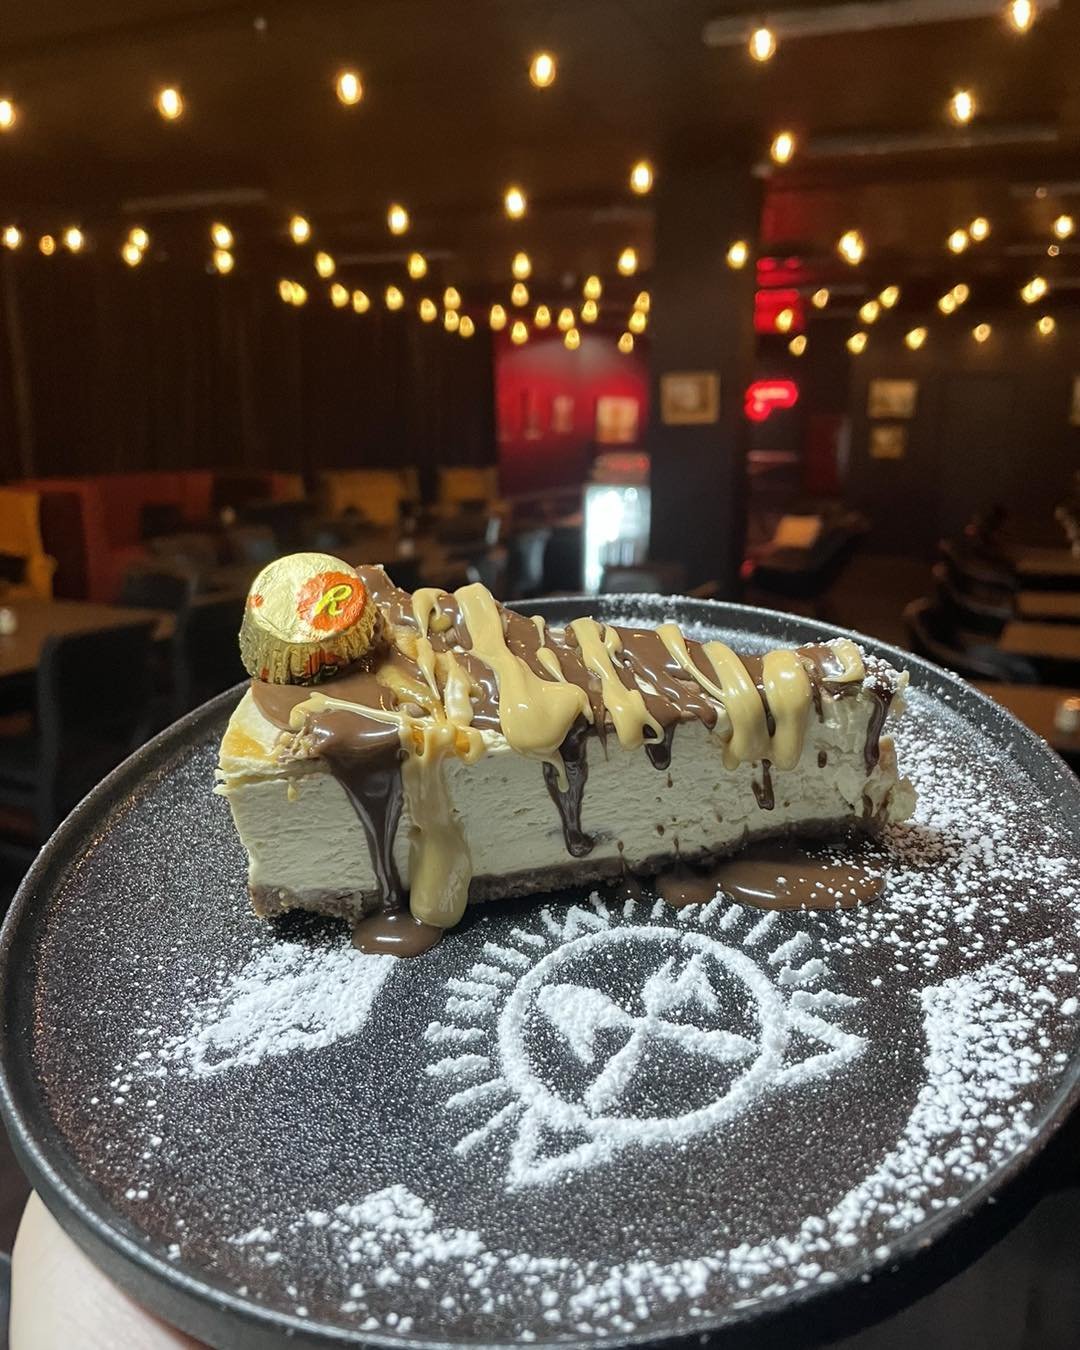 Reese pieces cheesecake?! Gluten free!?!
Yes. All of the yes! 
6pm til 11pm